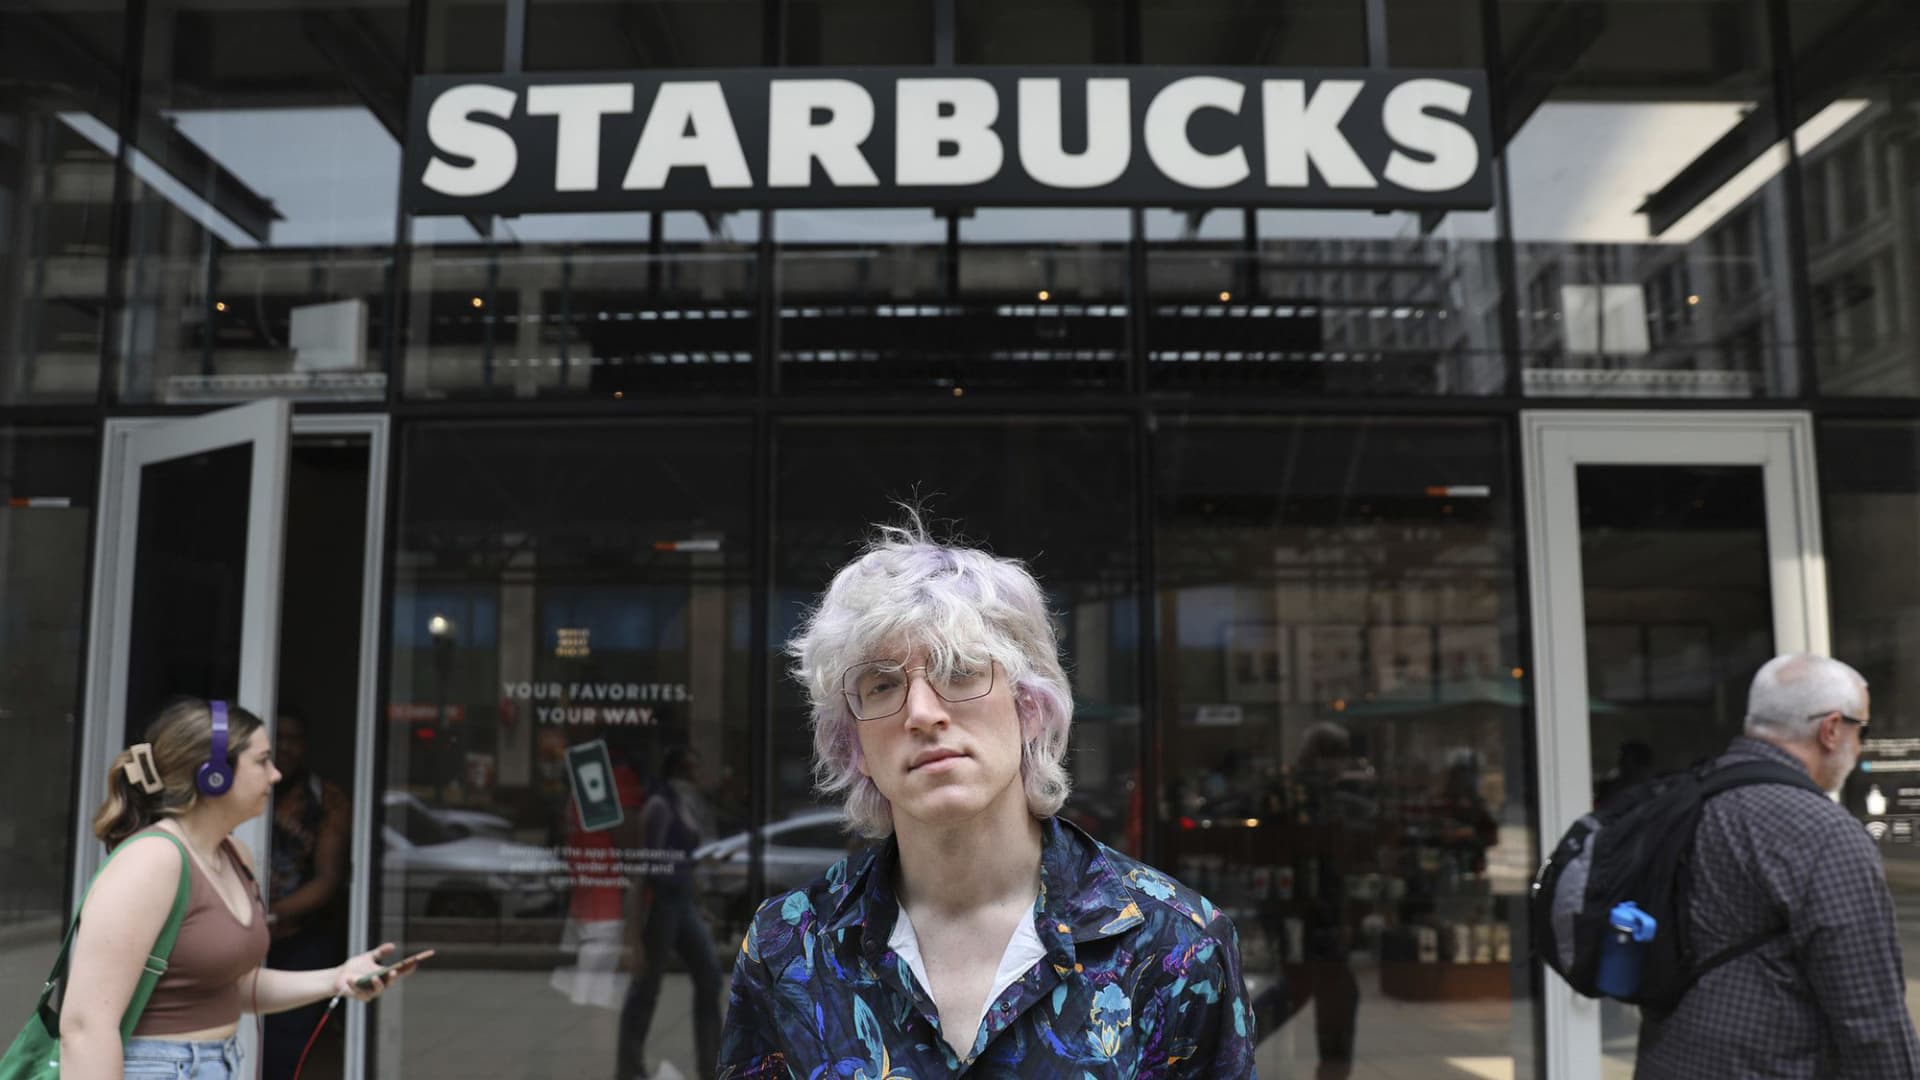 Starbucks barista Brick Zurek, standing in front of the downtown Starbucks on Wabash Avenue, on May 11, 2022, has been organizing for union representation with Starbucks Workers United. The Wabash Avenue location was the first Starbucks in Chicago to file for union representation with the National Labor Relations Board. (Chris Sweda/Chicago Tribune/Tribune News Service via Getty Images)